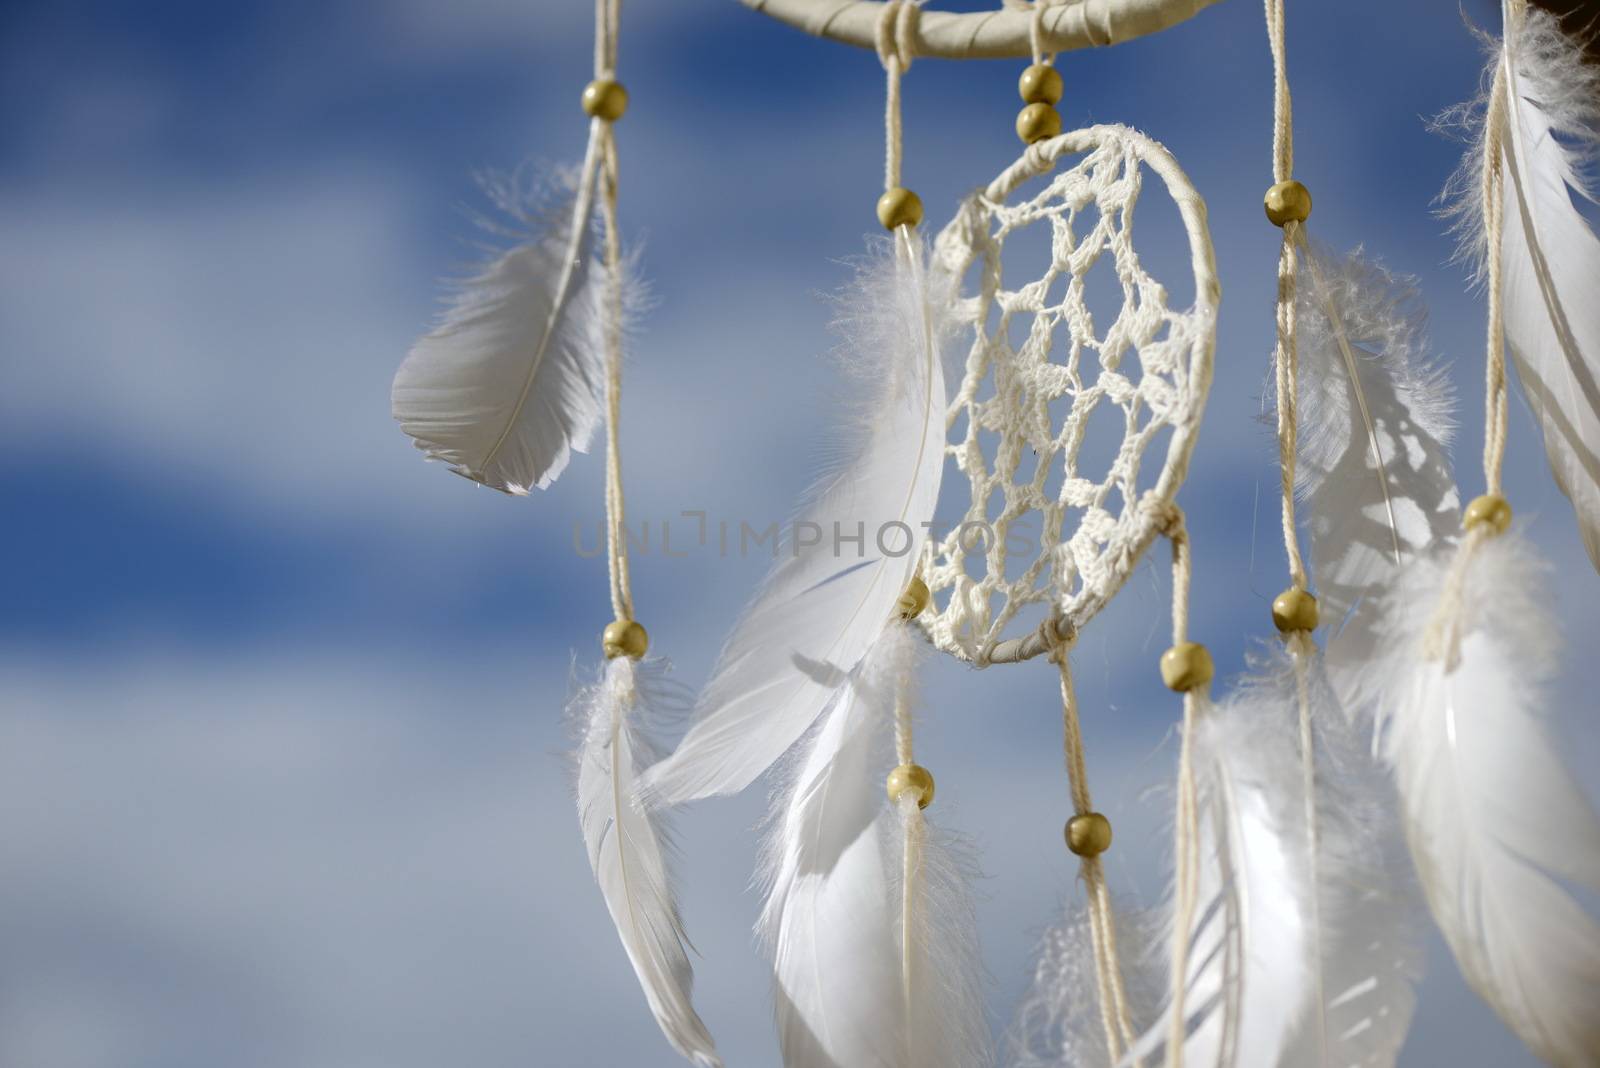 a Native american dream catcher moved by wind by Roman1030